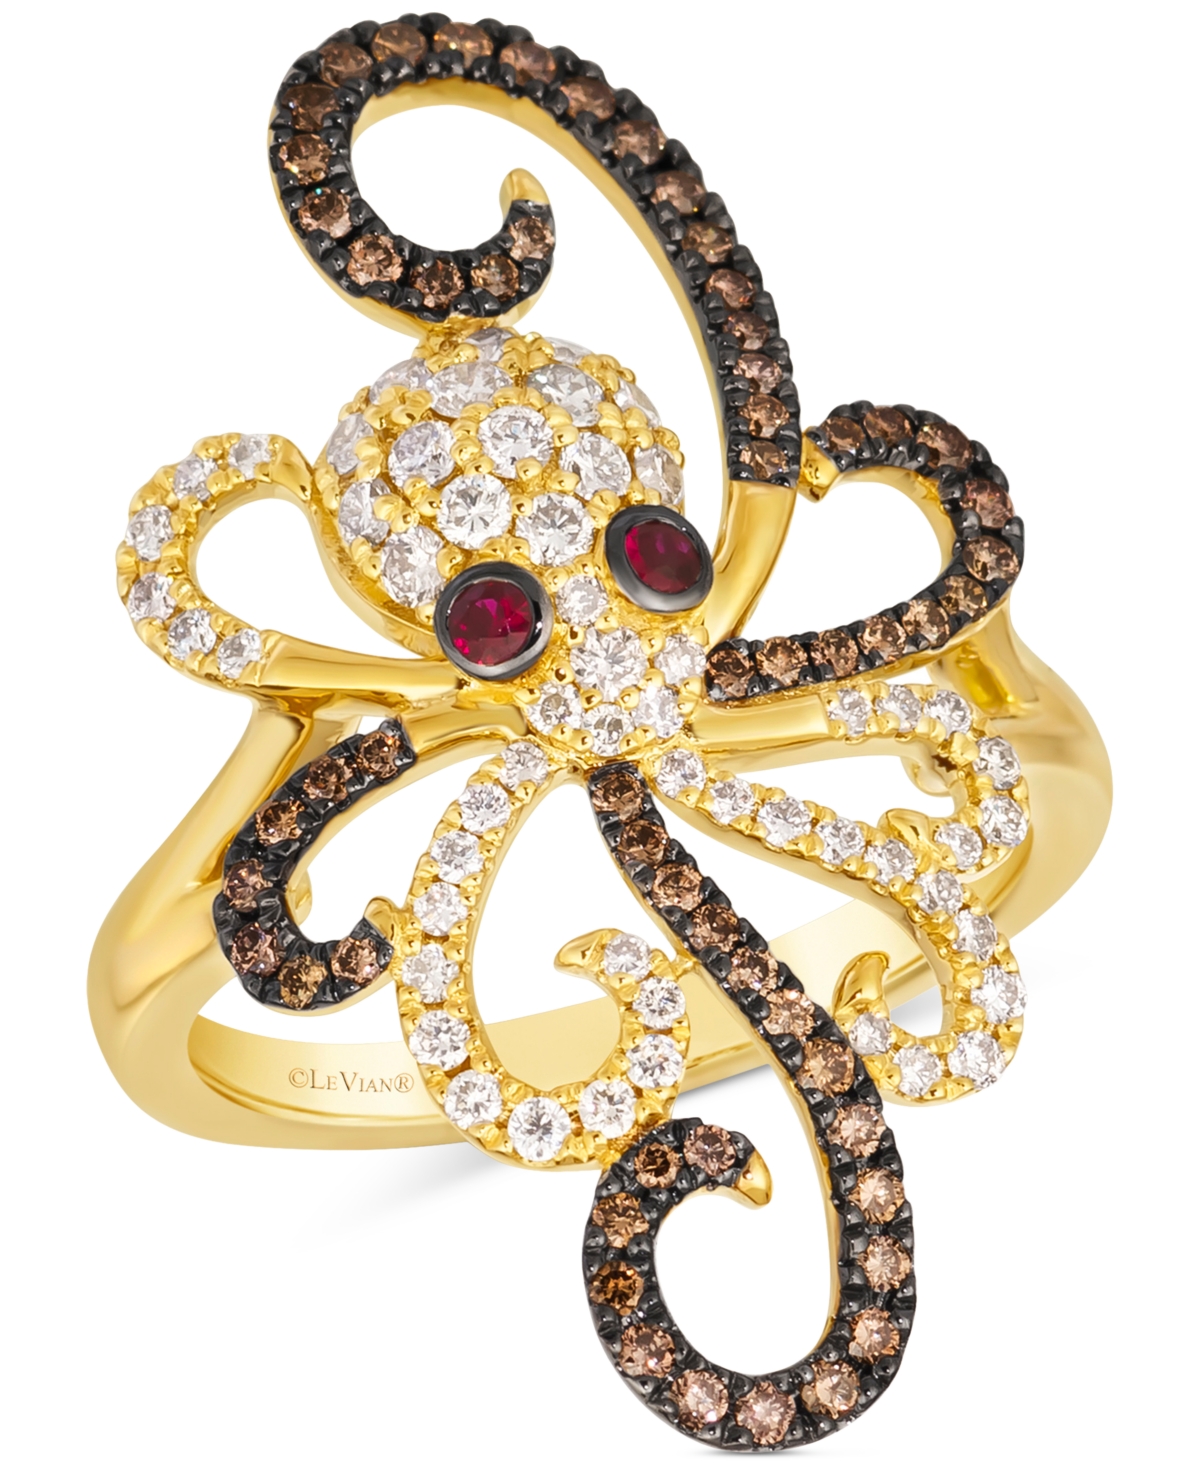 Le Vian Chocolate Diamond & Nude Diamond (7/8 Ct. T.w.) & Passion Ruby (1/20 Ct. T.w.) Octopus Ring In 14k G In K Honey Gold Ring